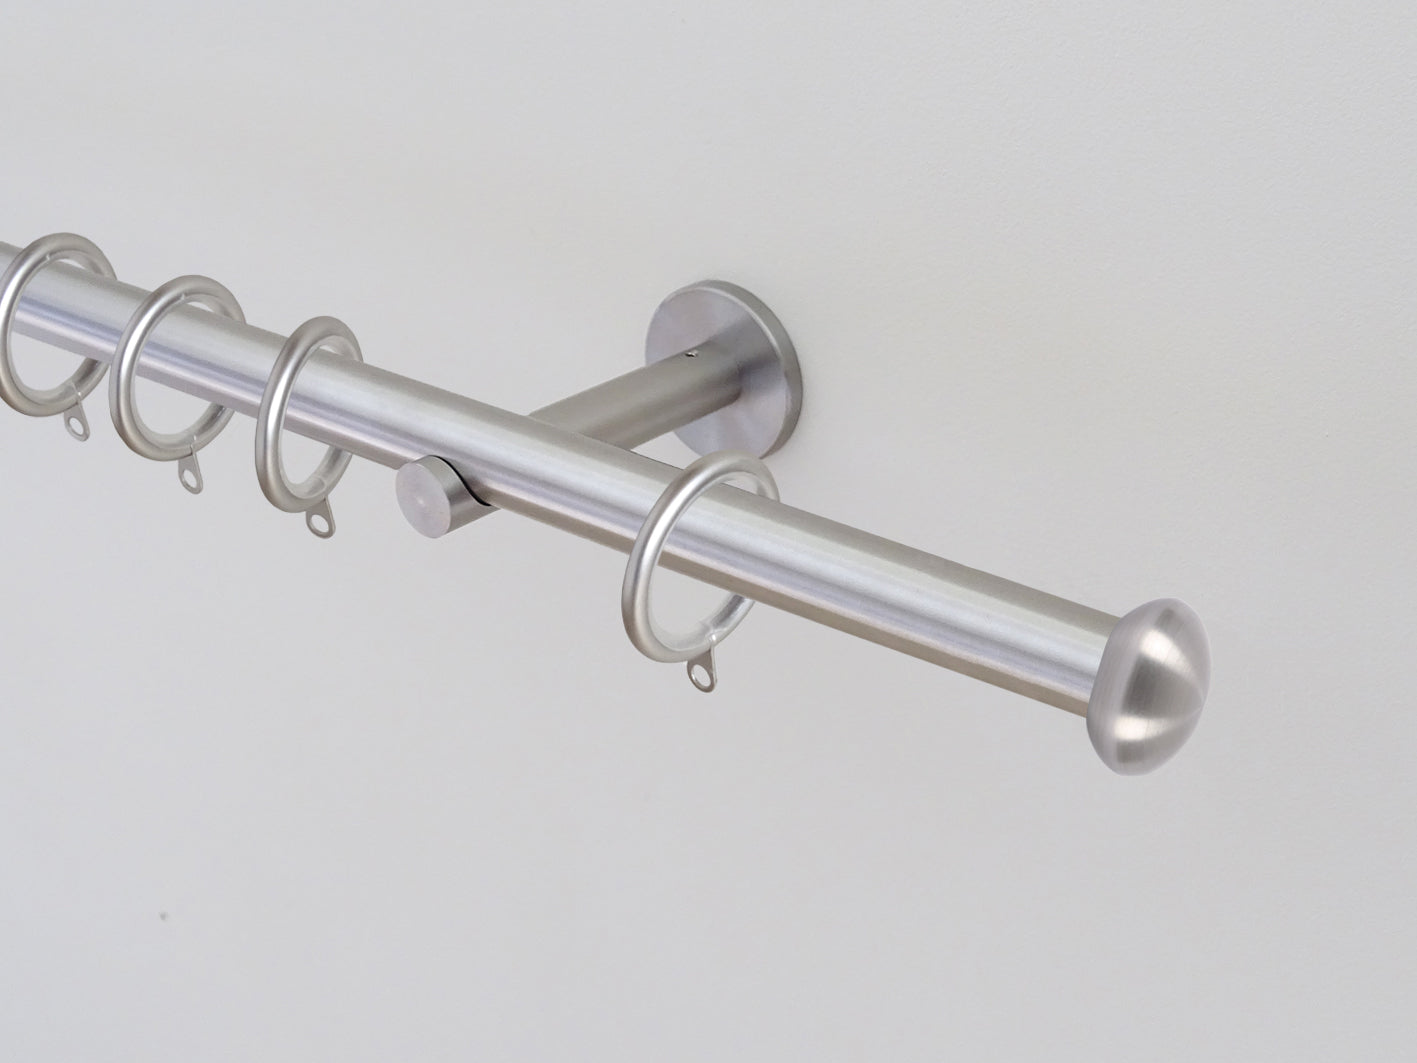 19mm diameter stainless steel metal curtain pole set with elliptical finials